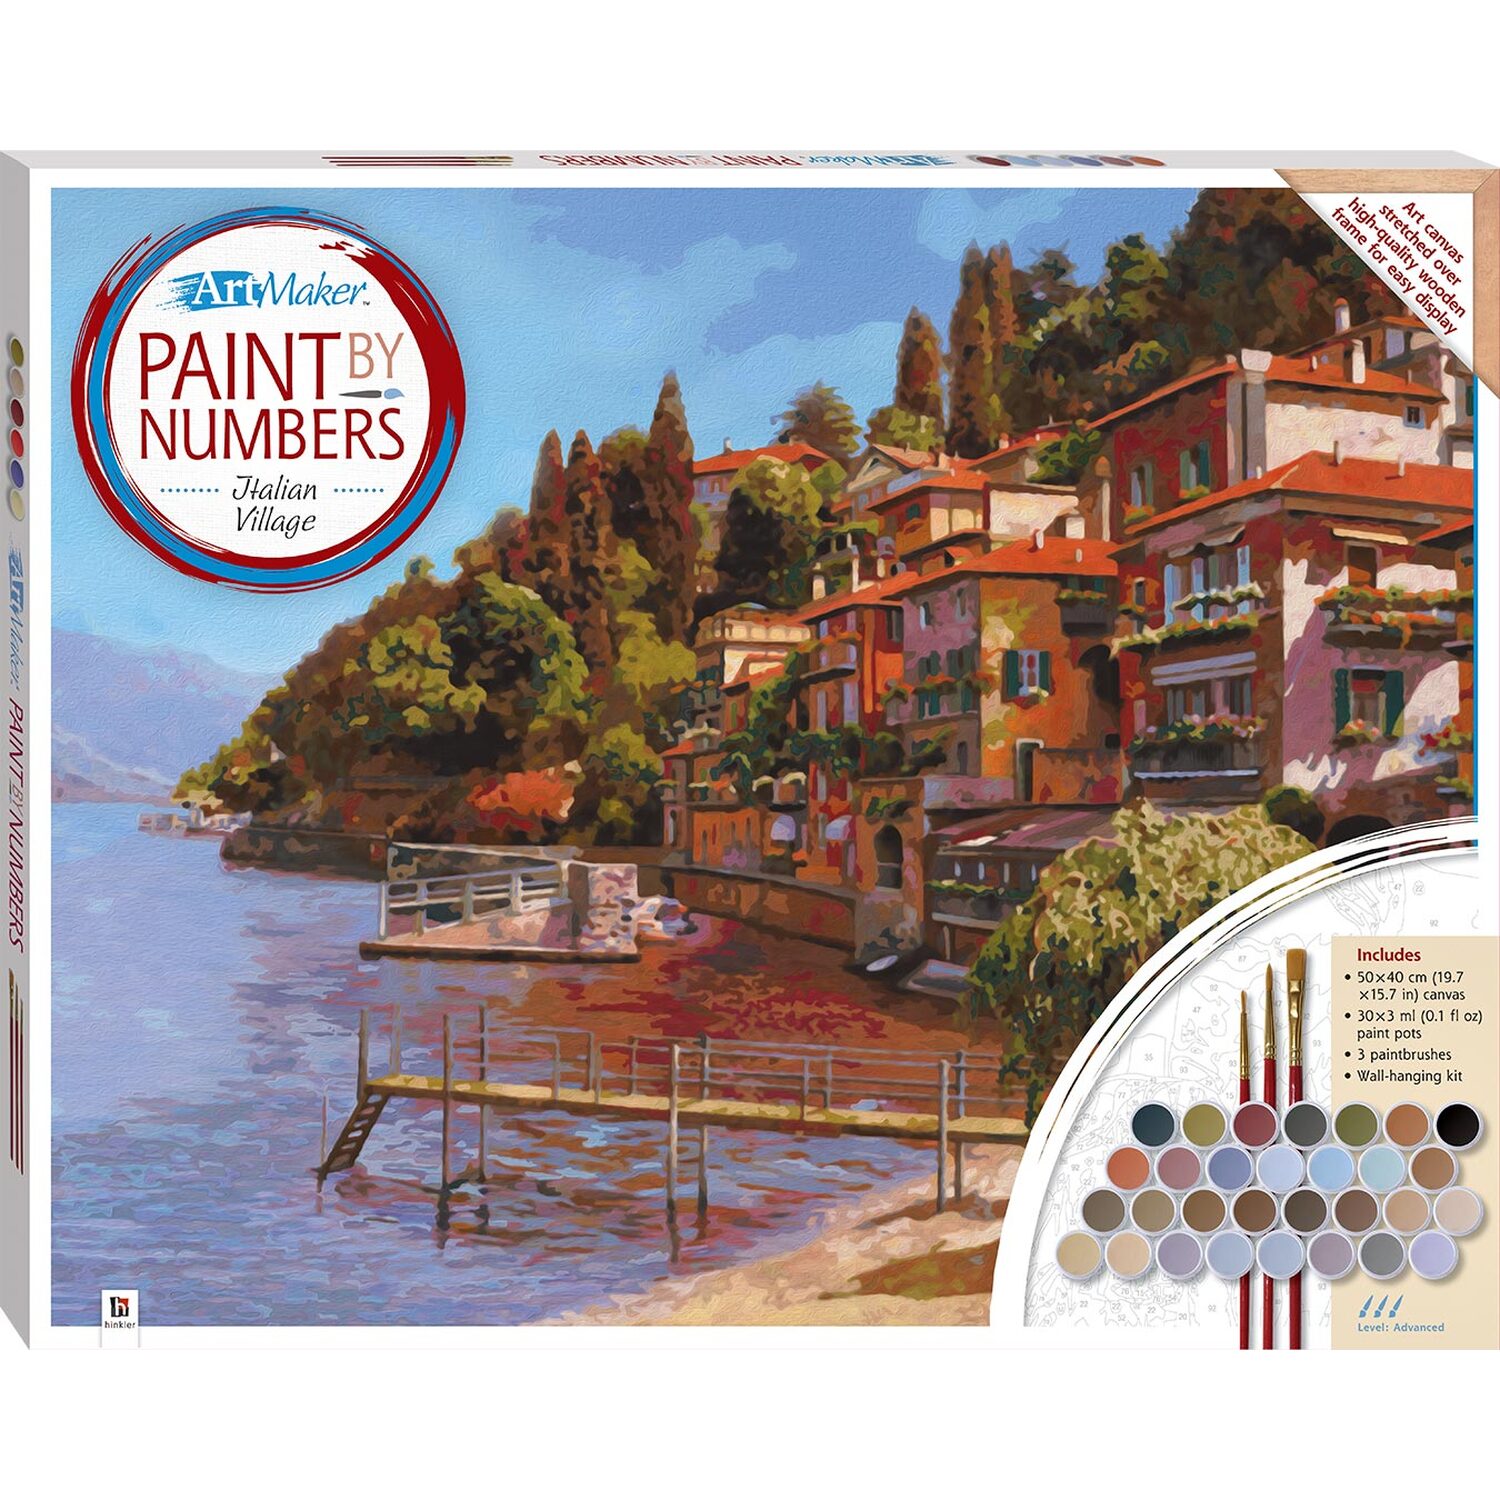 Hinkler Paint by Numbers Lake Coma Canvas Kit Image